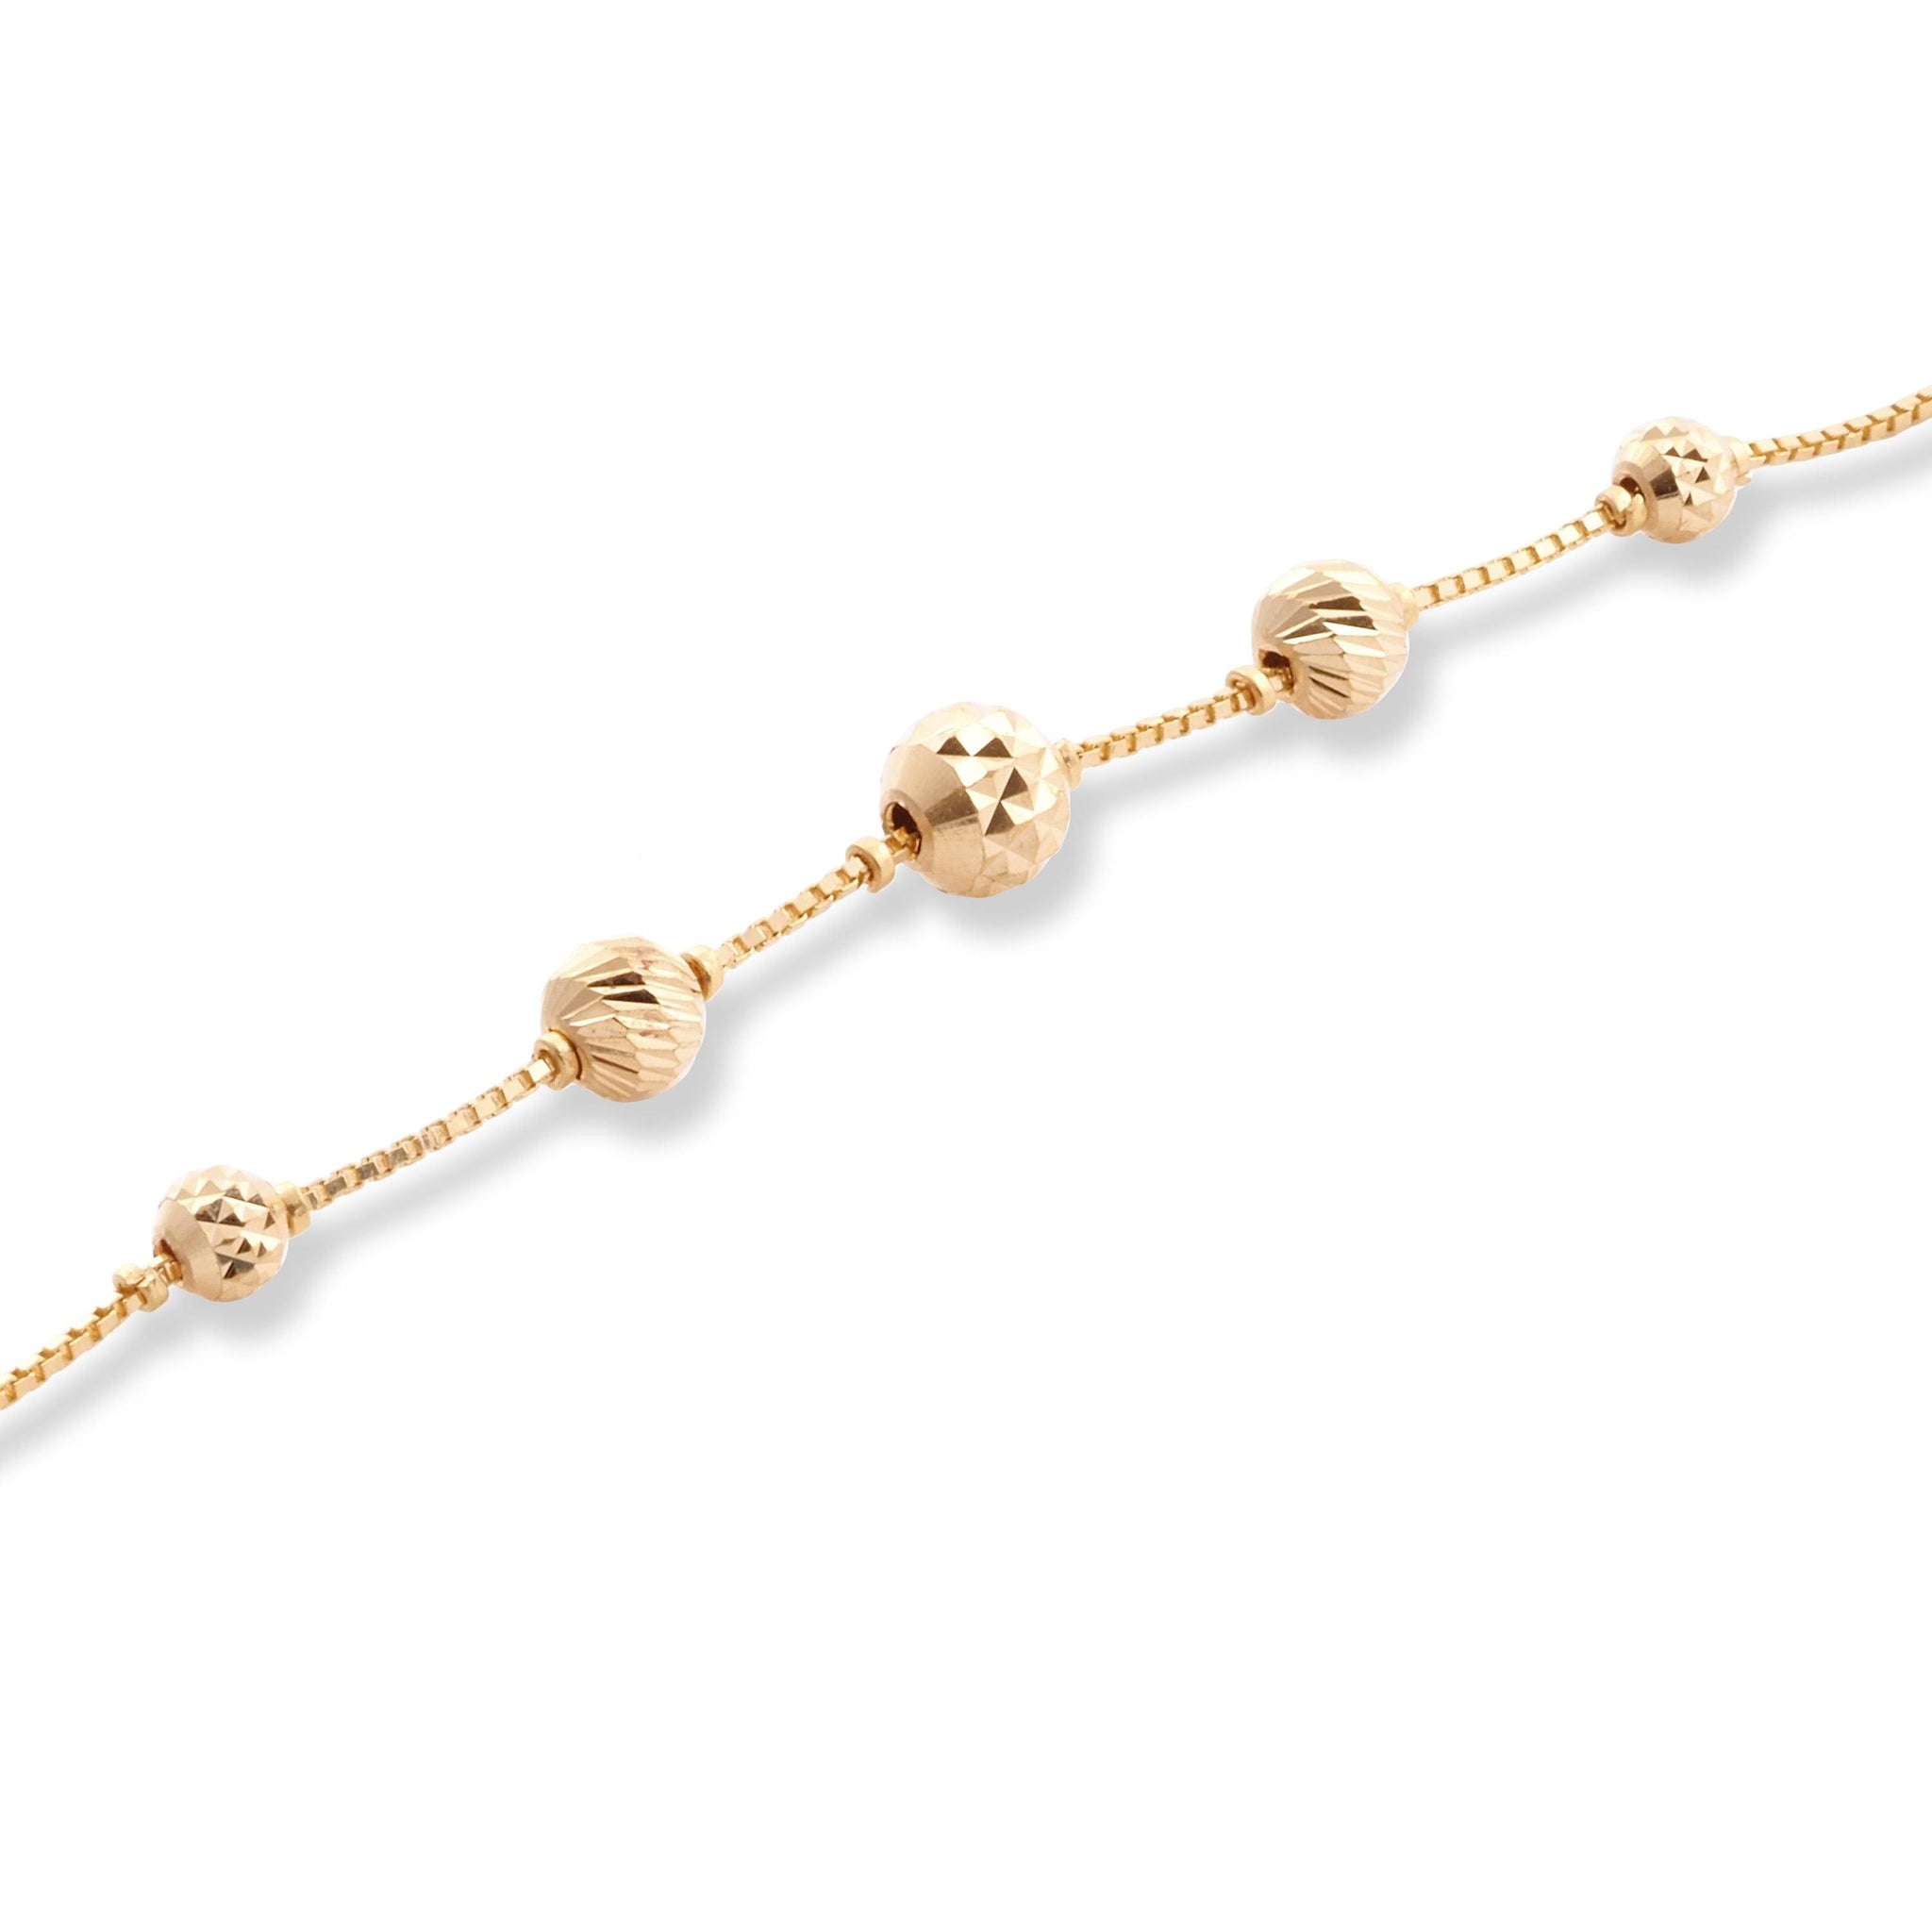 22ct Yellow Gold Bracelet in Rhodium Plating Beads with ''S'' Clasp LBR-8509